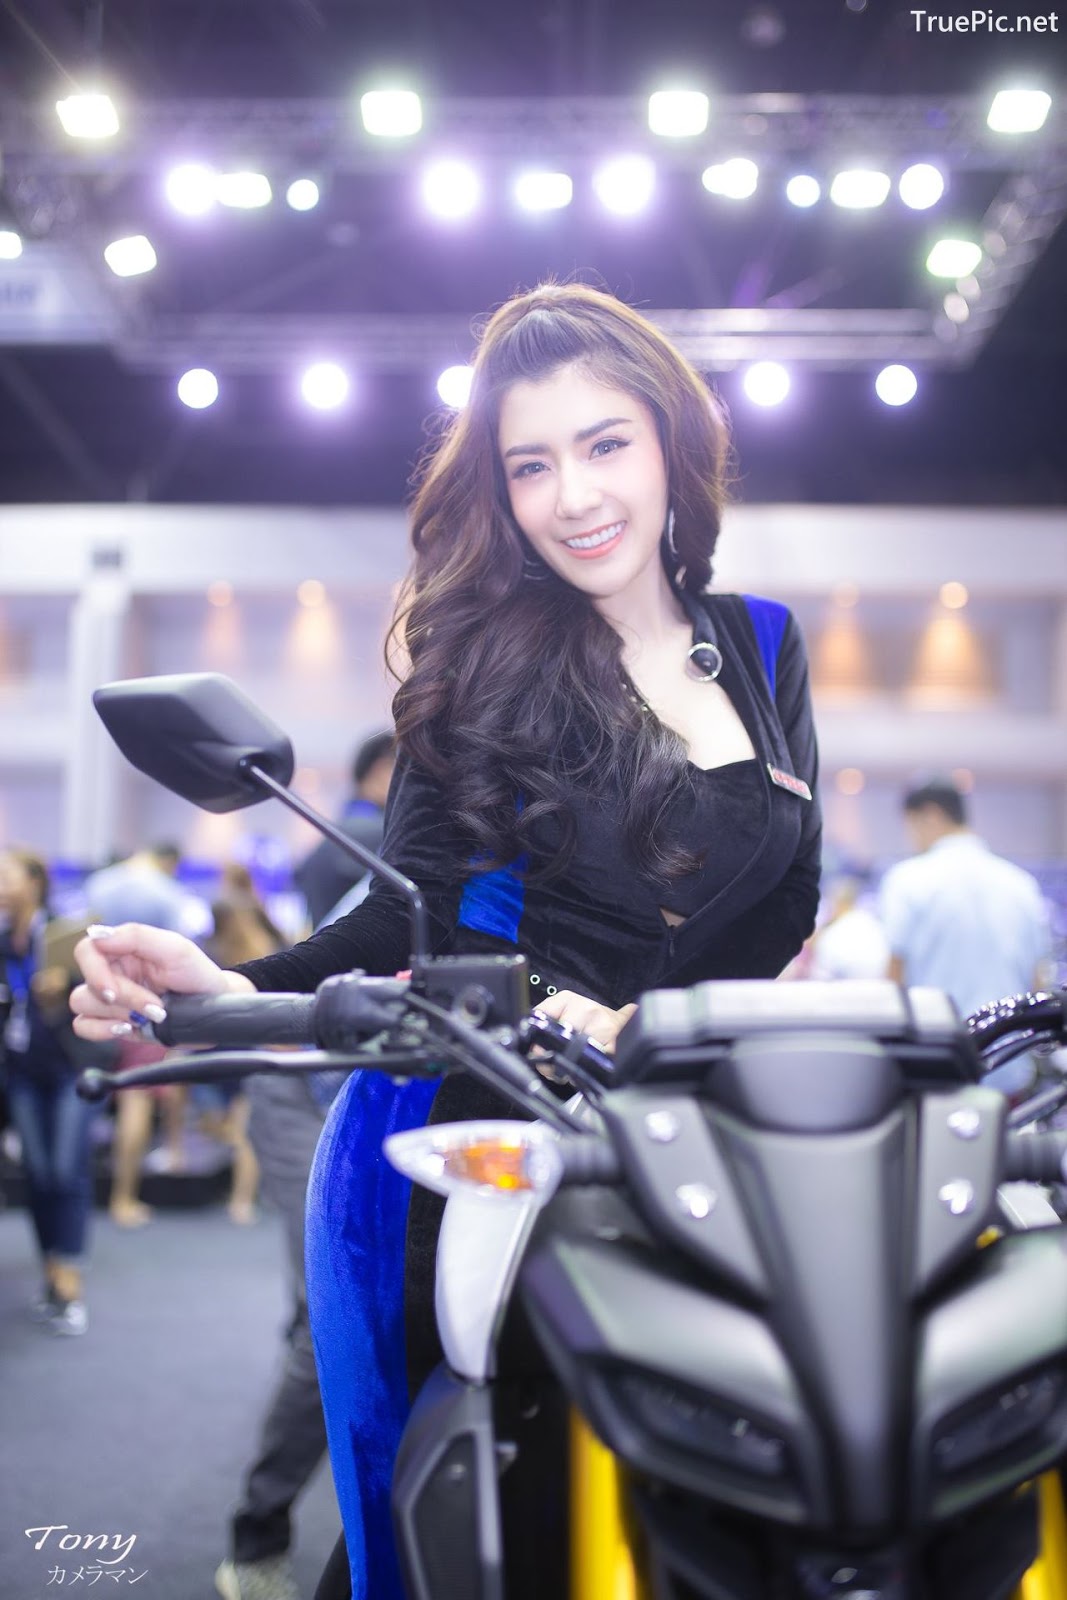 Image-Thailand-Hot-Model-Thai-Racing-Girl-At-Motor-Expo-2018-TruePic.net- Picture-59